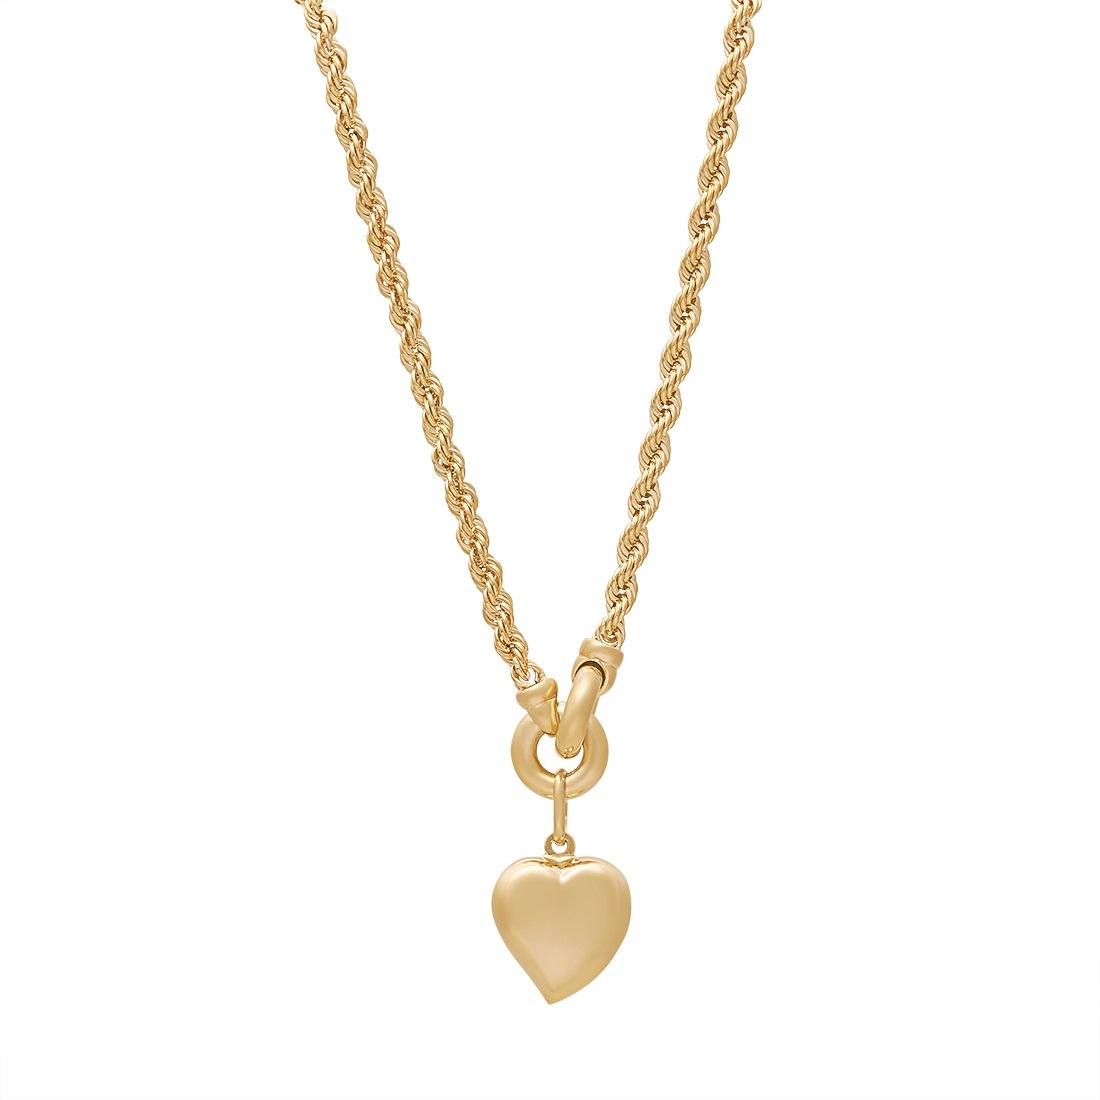 Rope Necklace with Heart Charm in 9ct Yellow Gold Necklaces Bevilles 